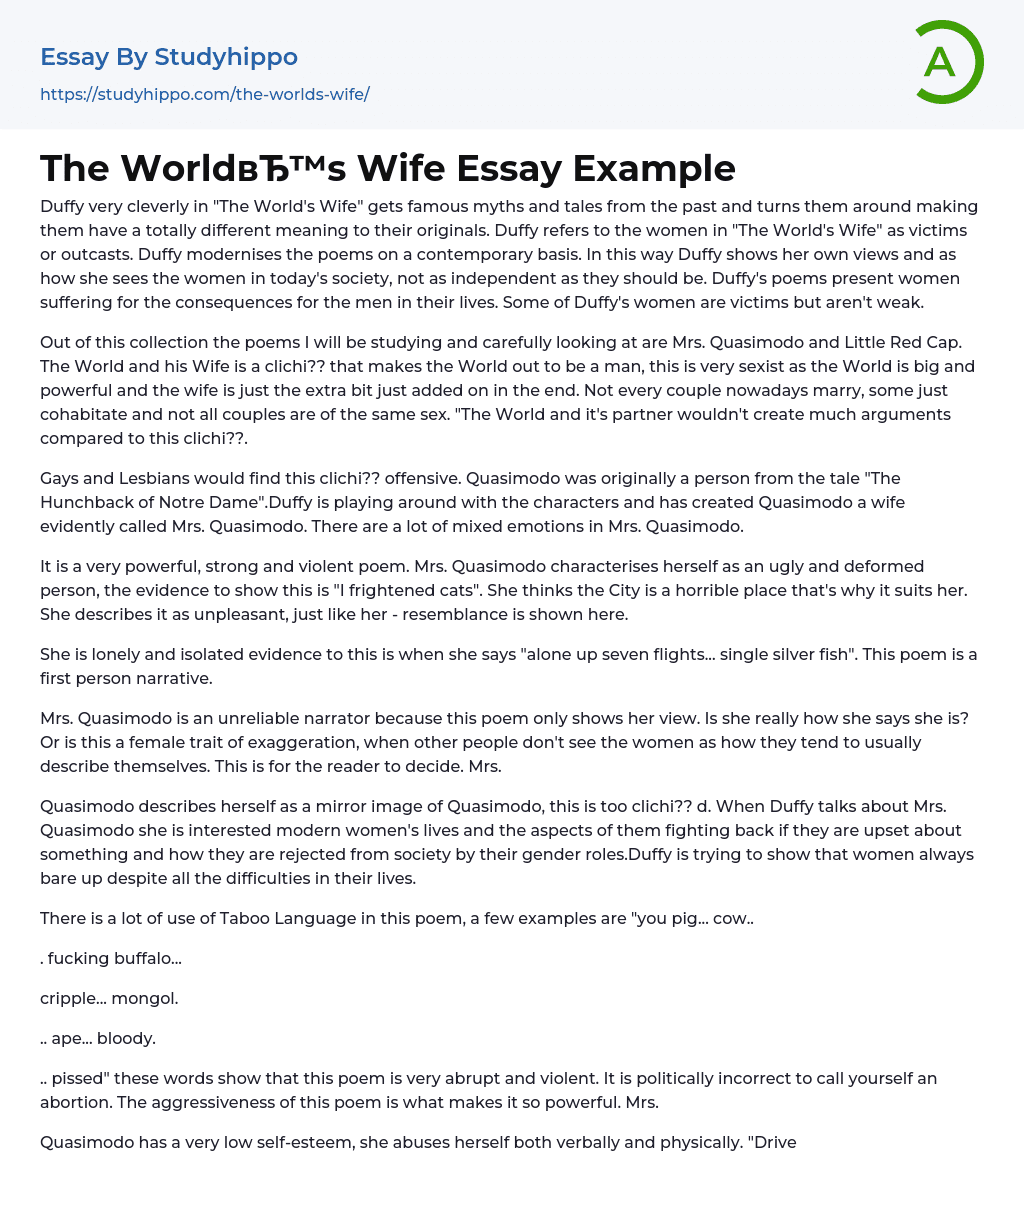 The World’s Wife Essay Example